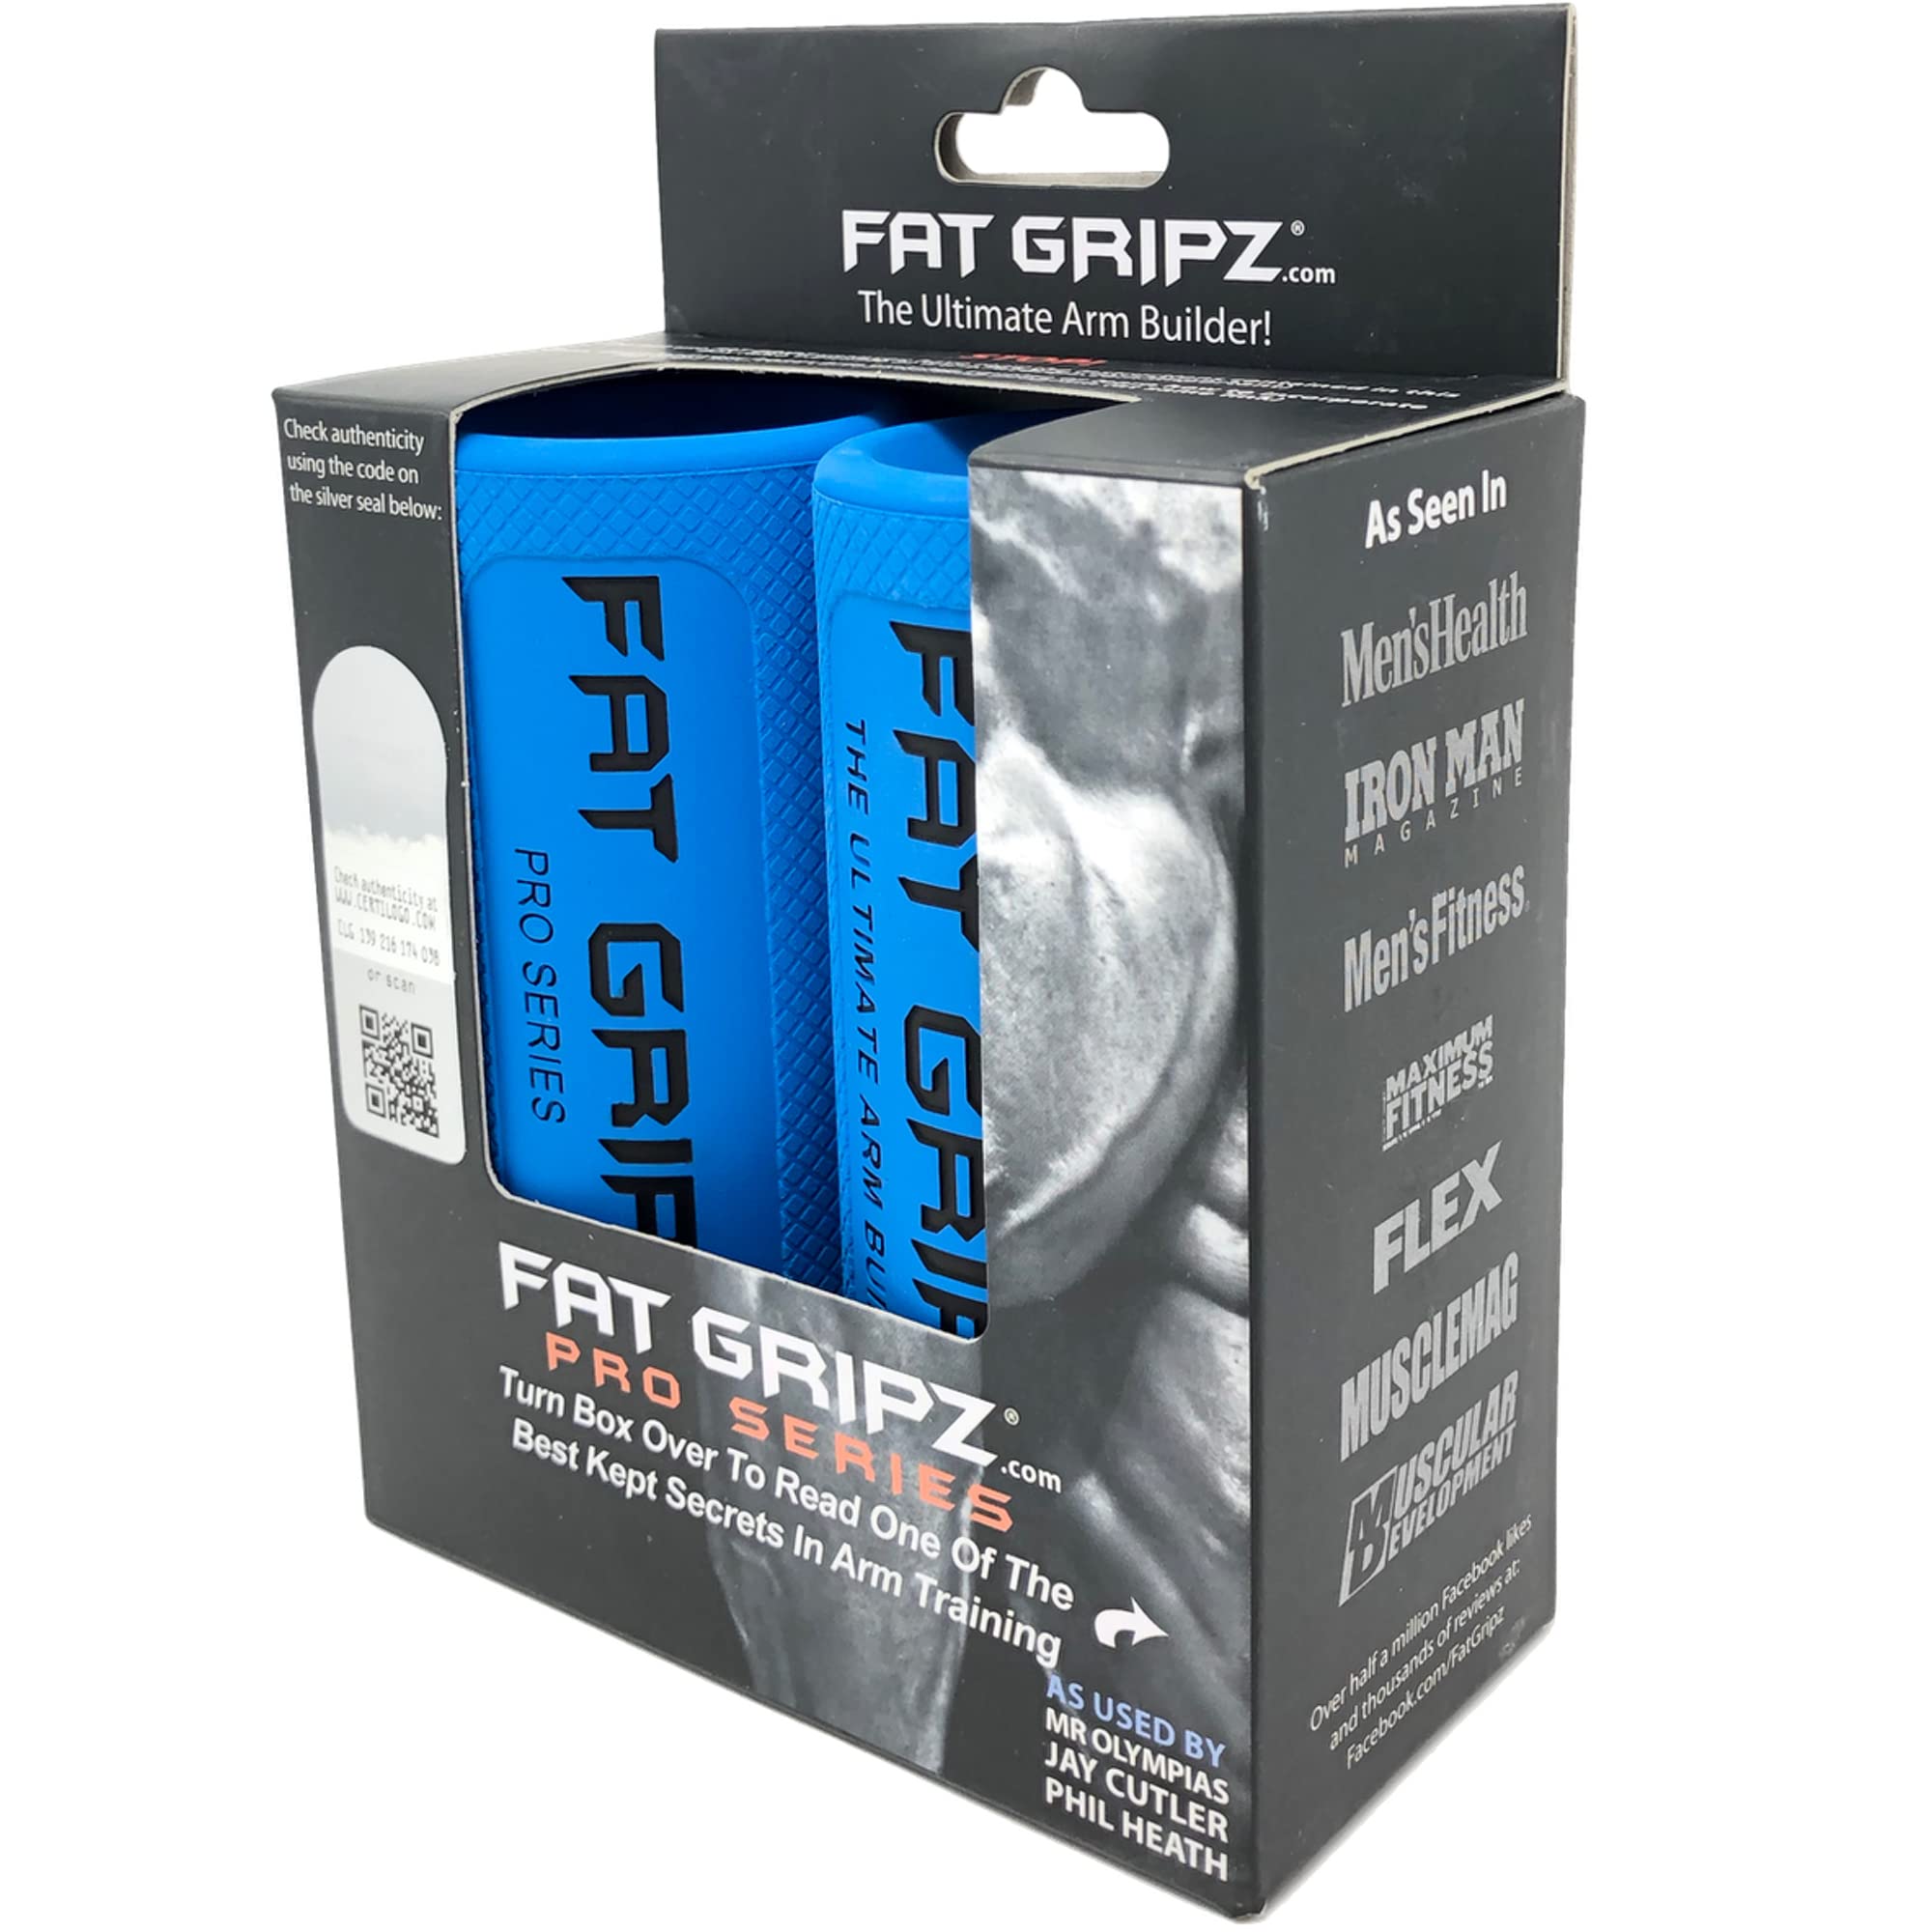 Fat gripz Pro - The Simple Proven Way to get Big Biceps & Forearms Fast - At Home Or In The gym (Winner of 3 MenAs Health Magazi